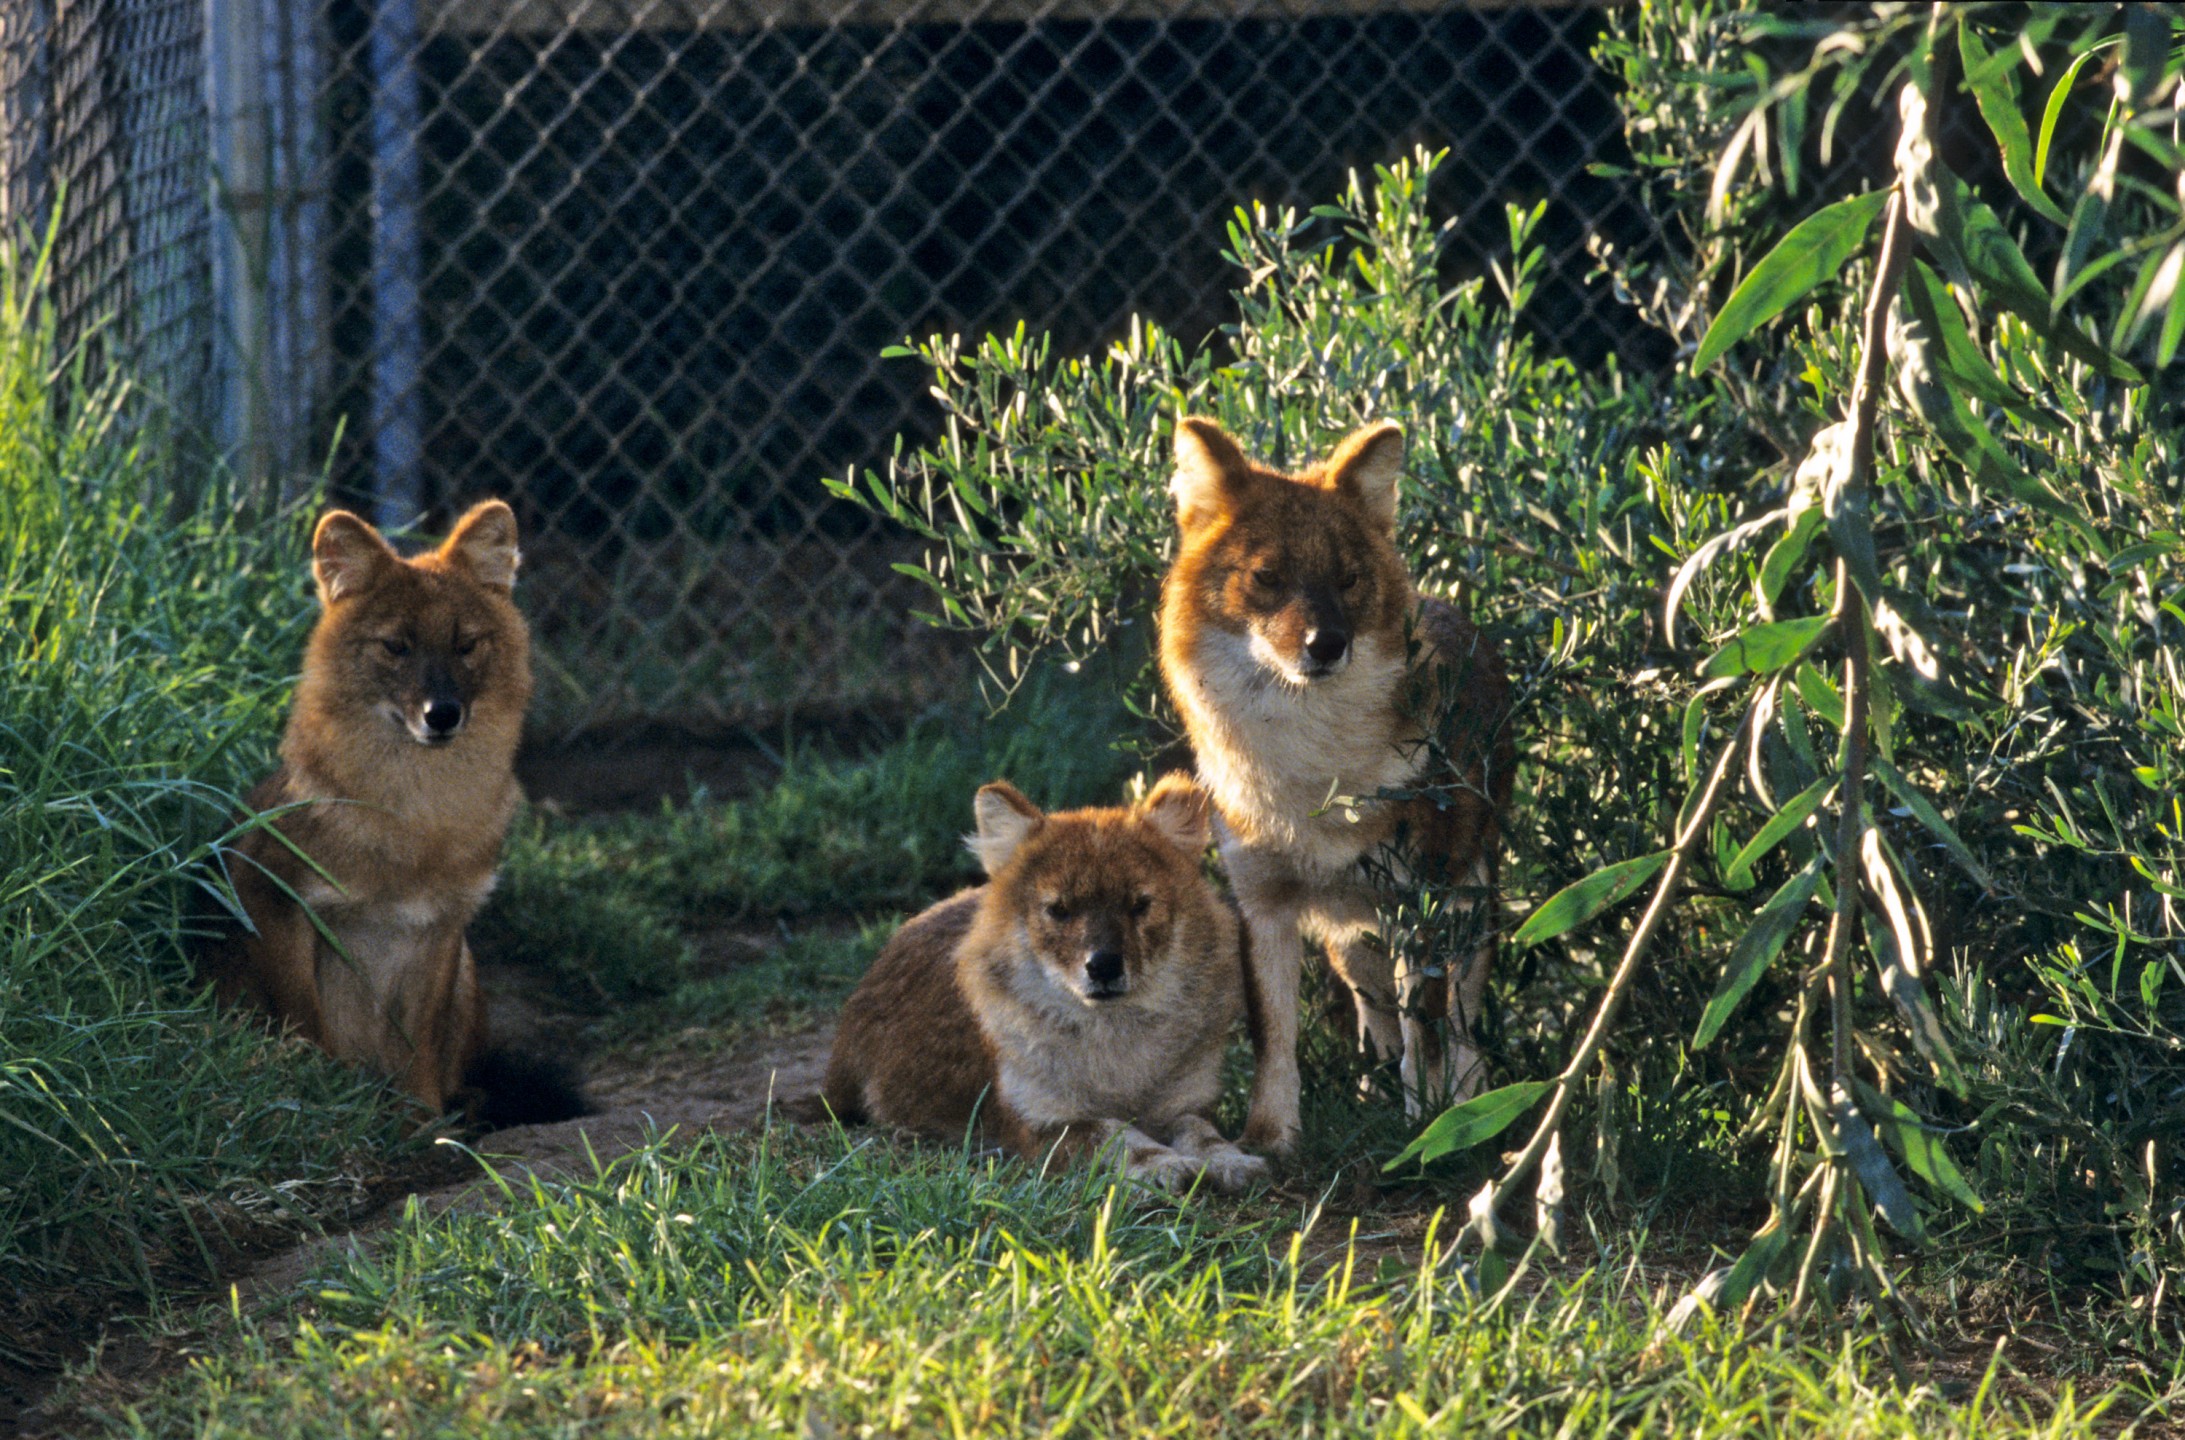 Chinese dholes